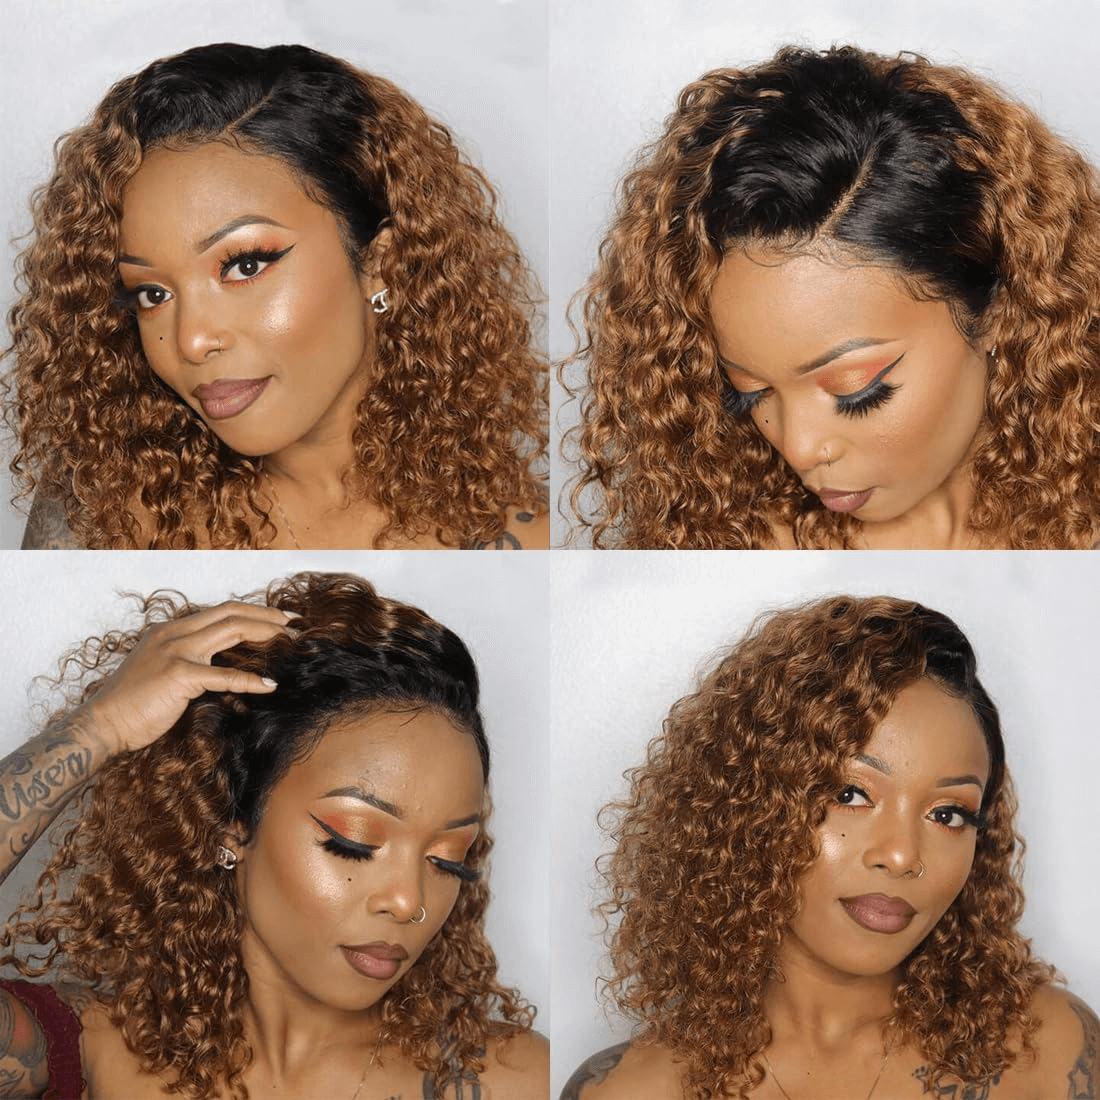 Wesface Ombre Lace Closure Wig Human Hair Short Curly Bob Brown Ombre Glueless Wigs Human Hair Pre Plucked With Baby Hair for Black Women 4x4 Lace Closure Brazilian Virgin Hair Dark Roots Wig